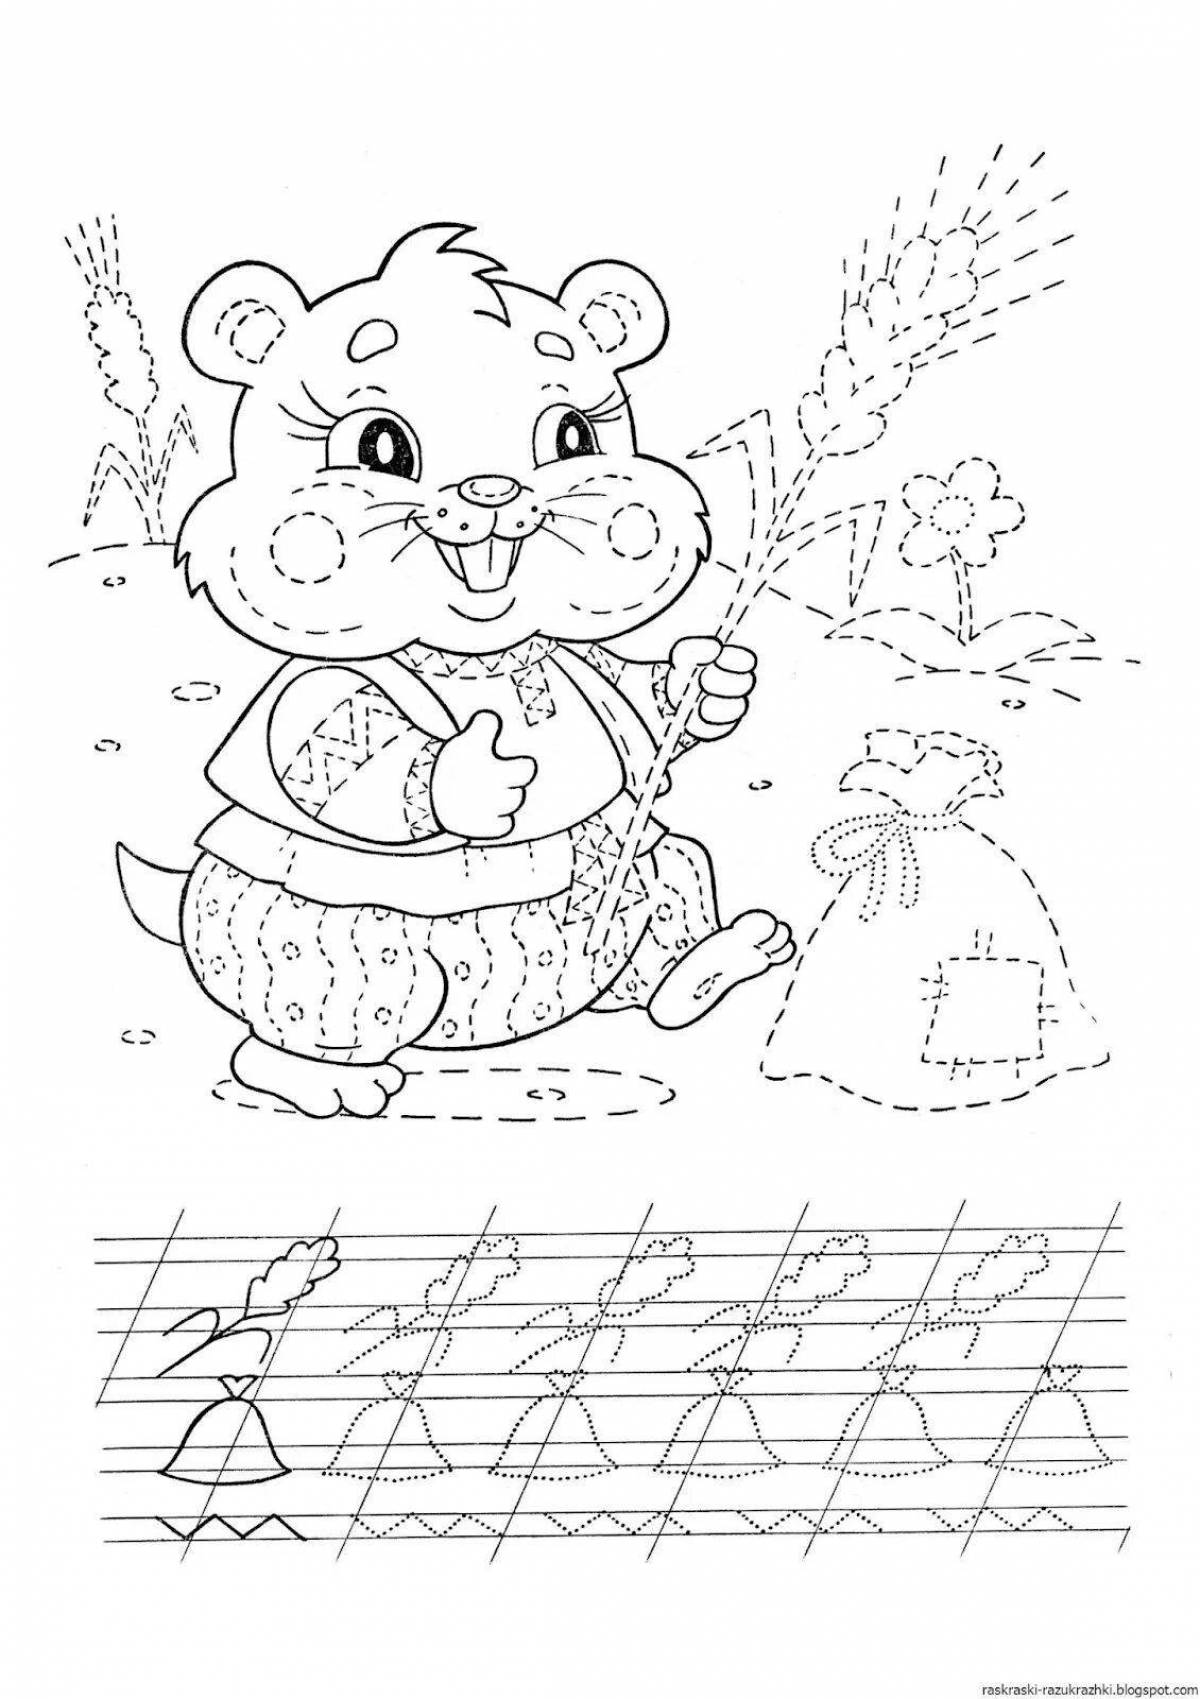 Adorable recipe coloring book for 5 year olds